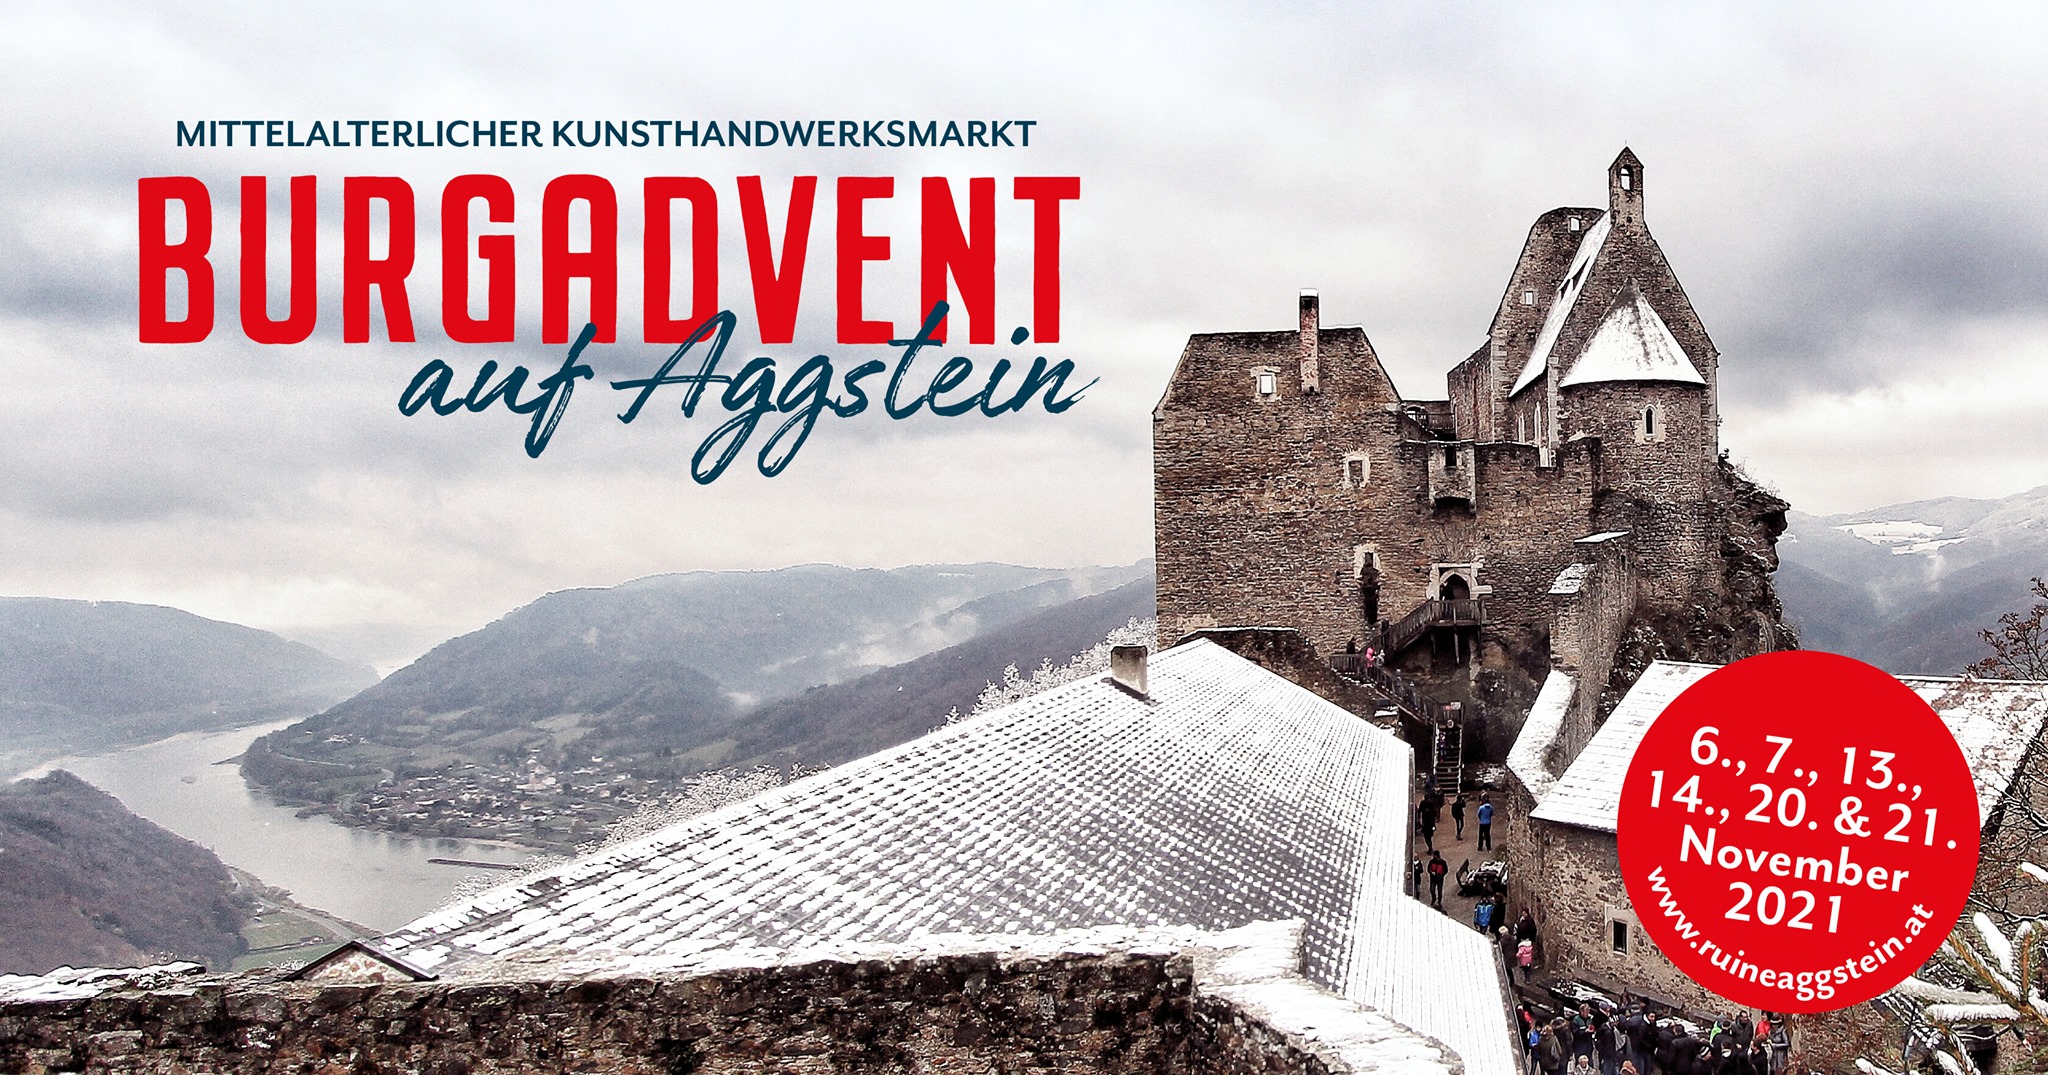 You are currently viewing Burgadvent auf Aggstein